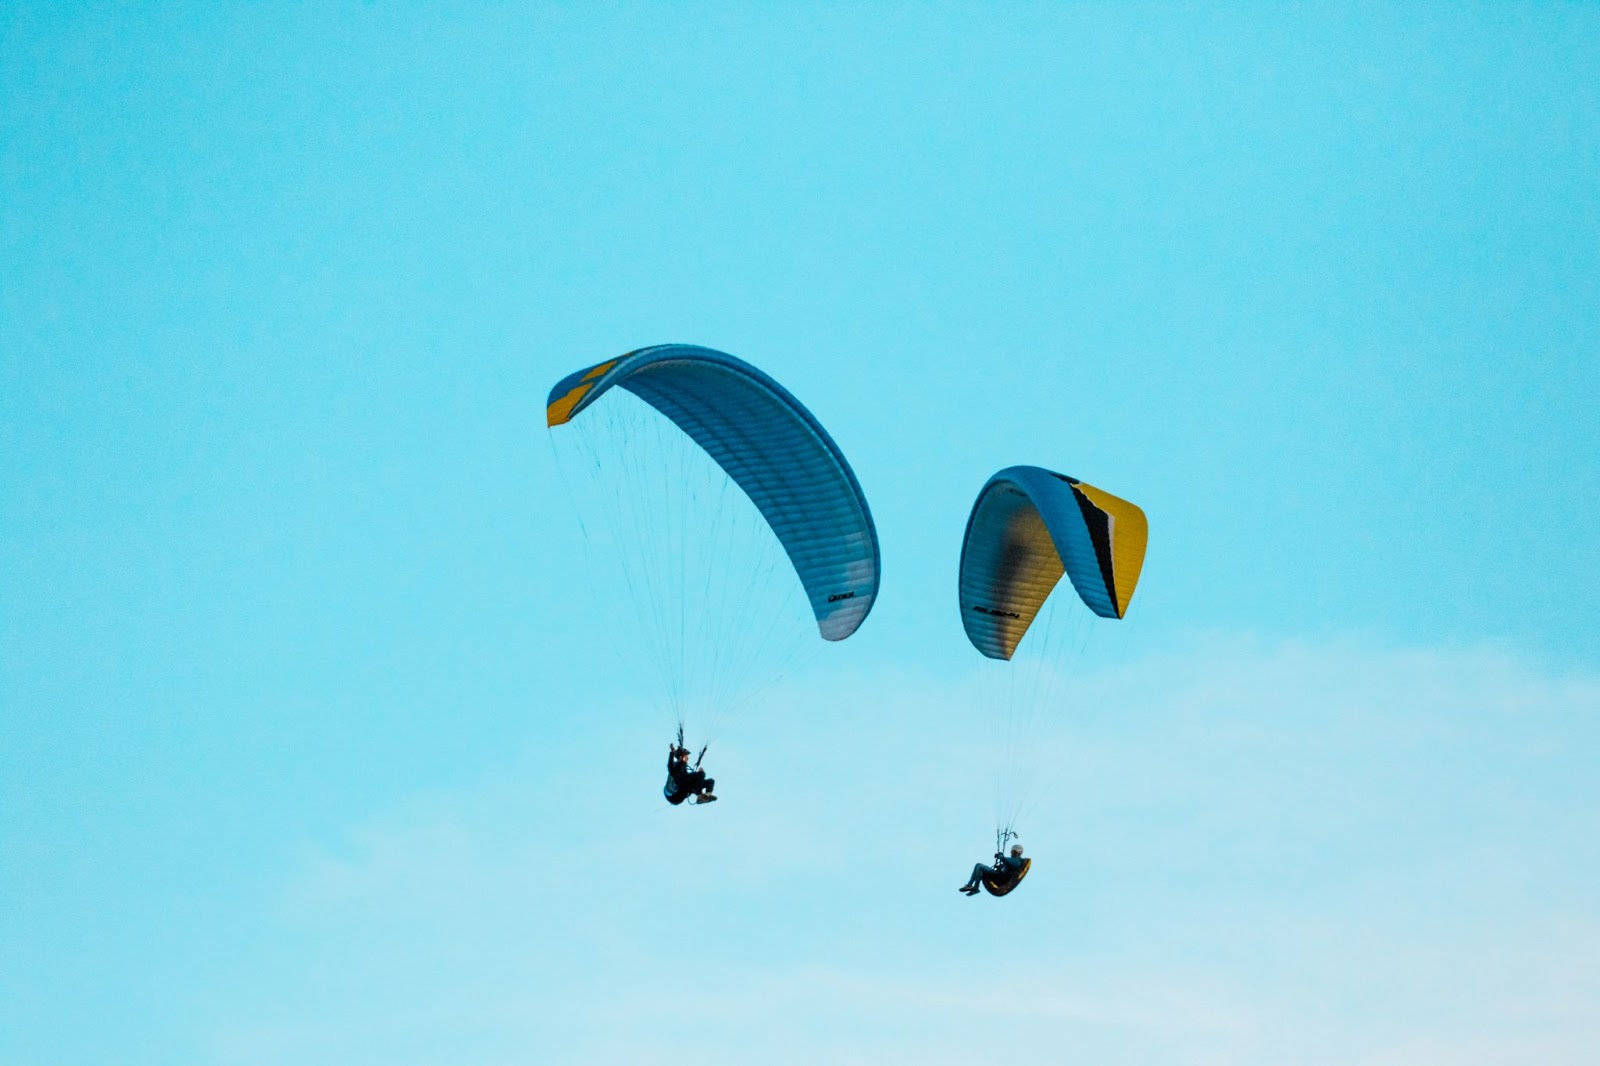 Two paragliders enjoying the view